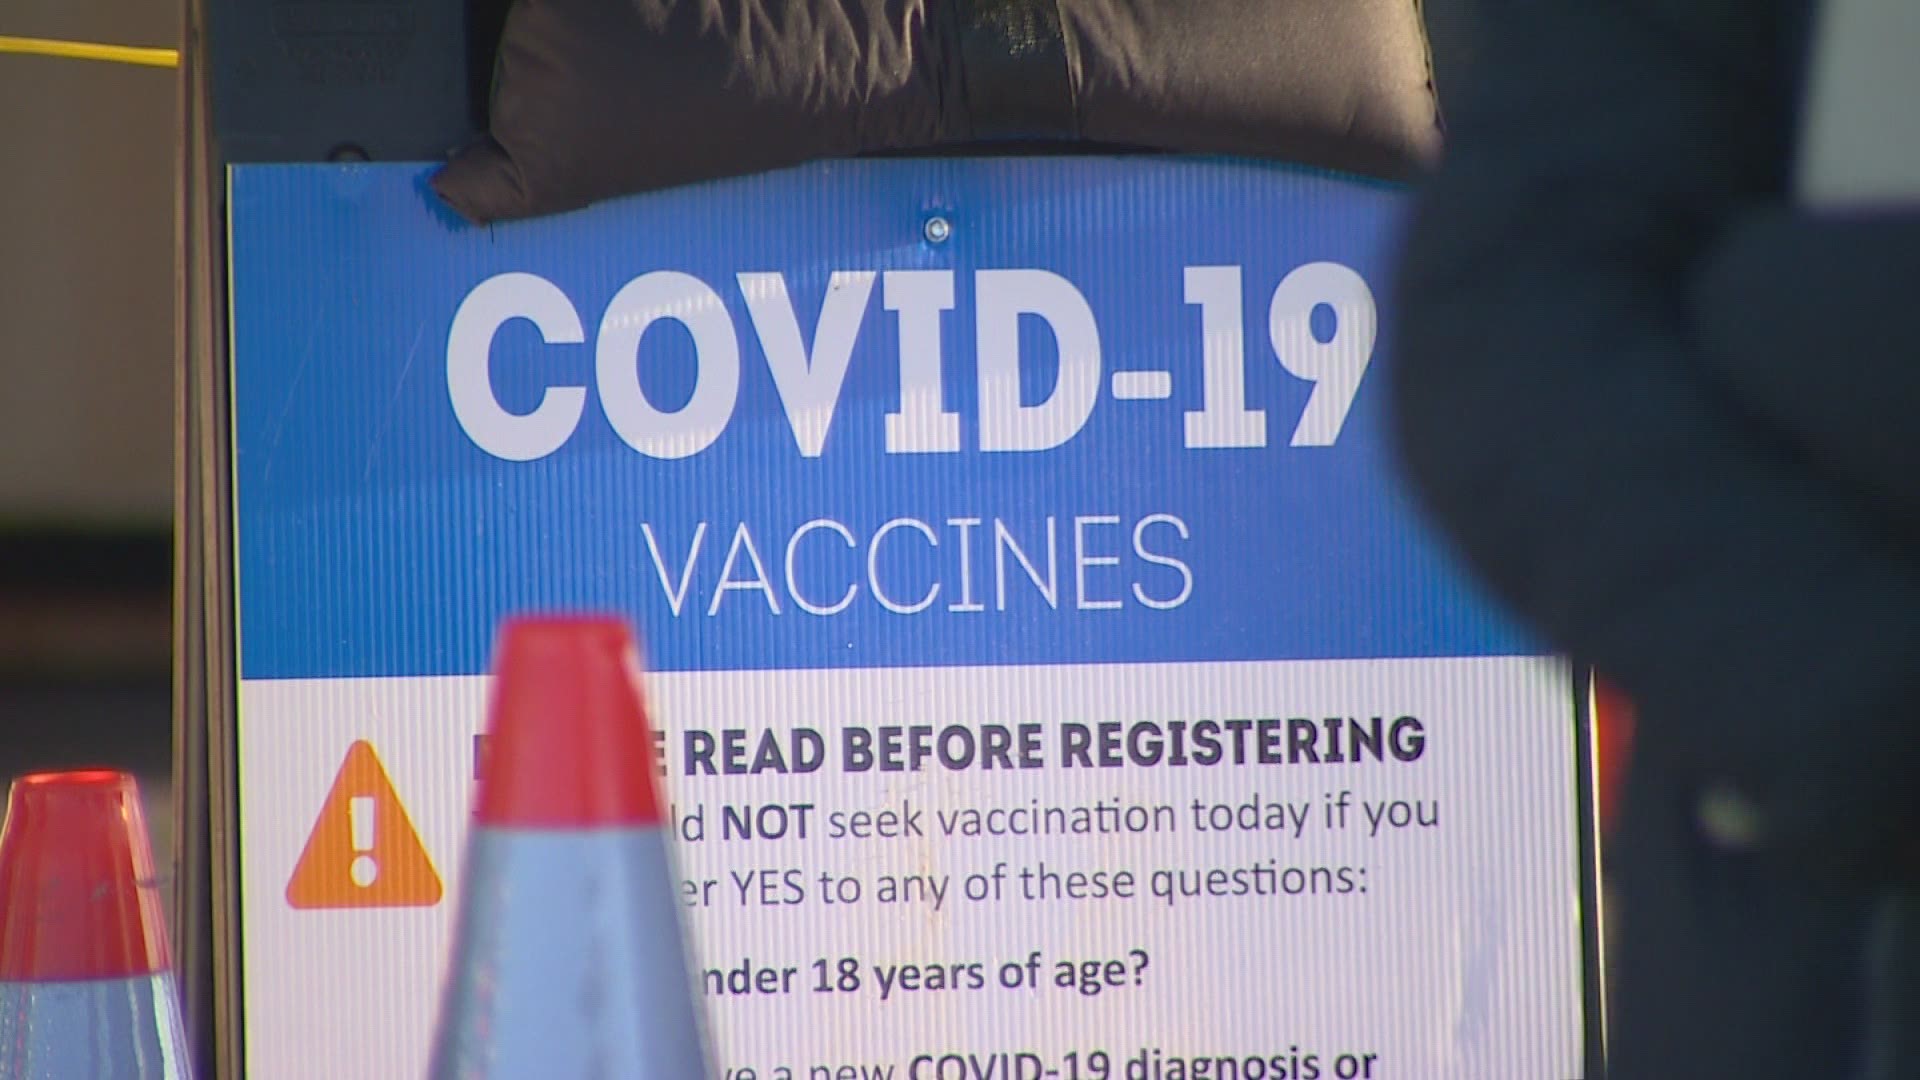 King County top health official Dr. Jeff Duchin also says accelerating vaccine eligibility ahead of May 1 could exacerbate inequities.